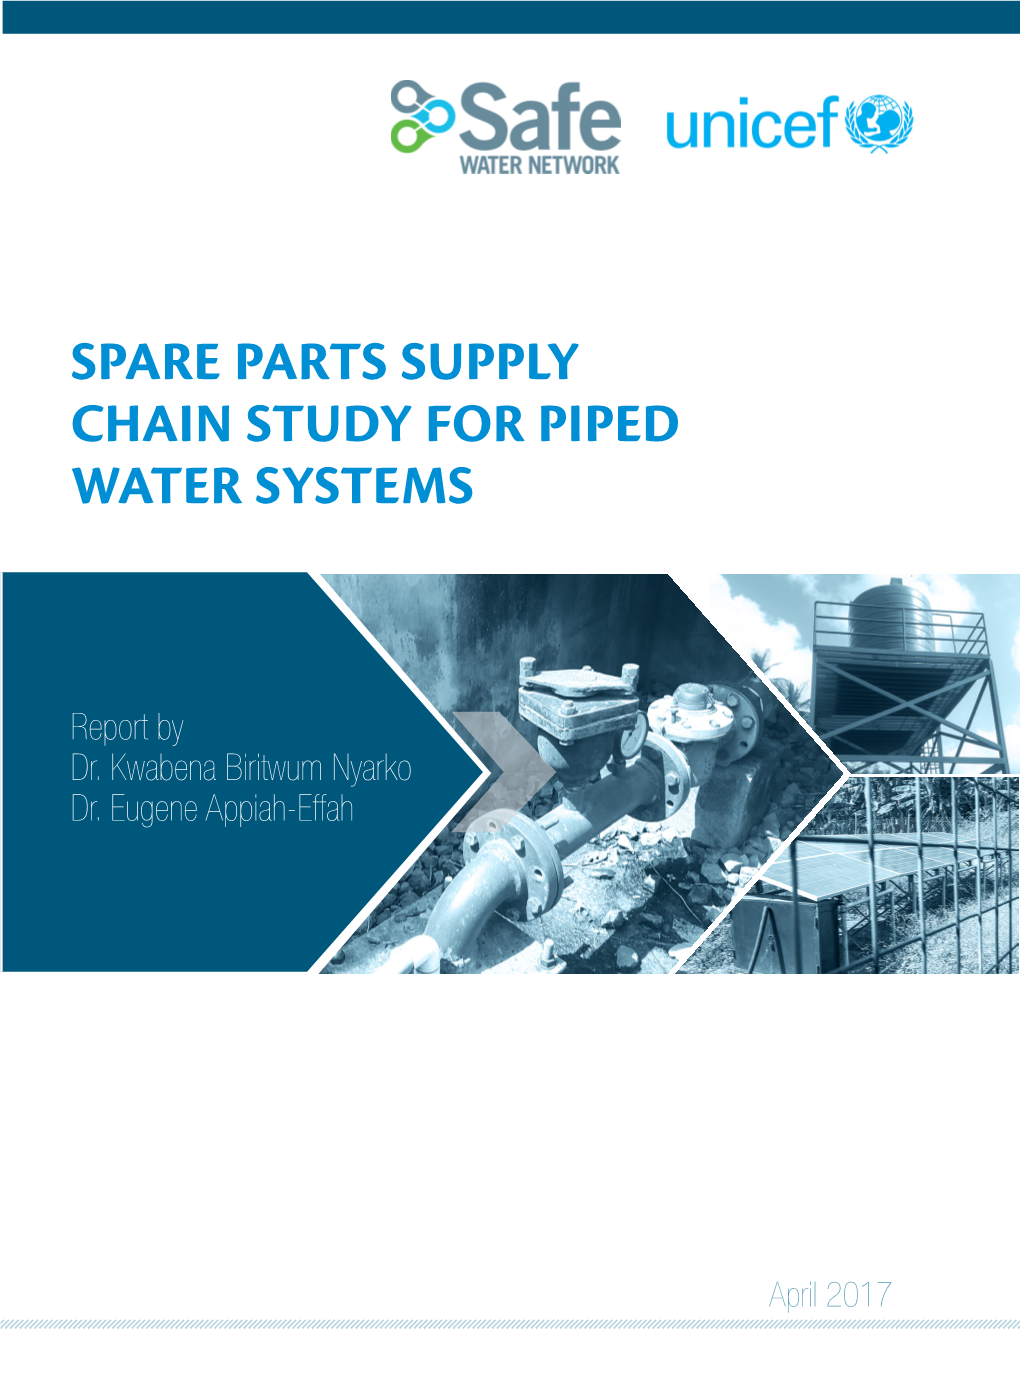 Spare Parts Supply Chain Study for Piped Water Systems